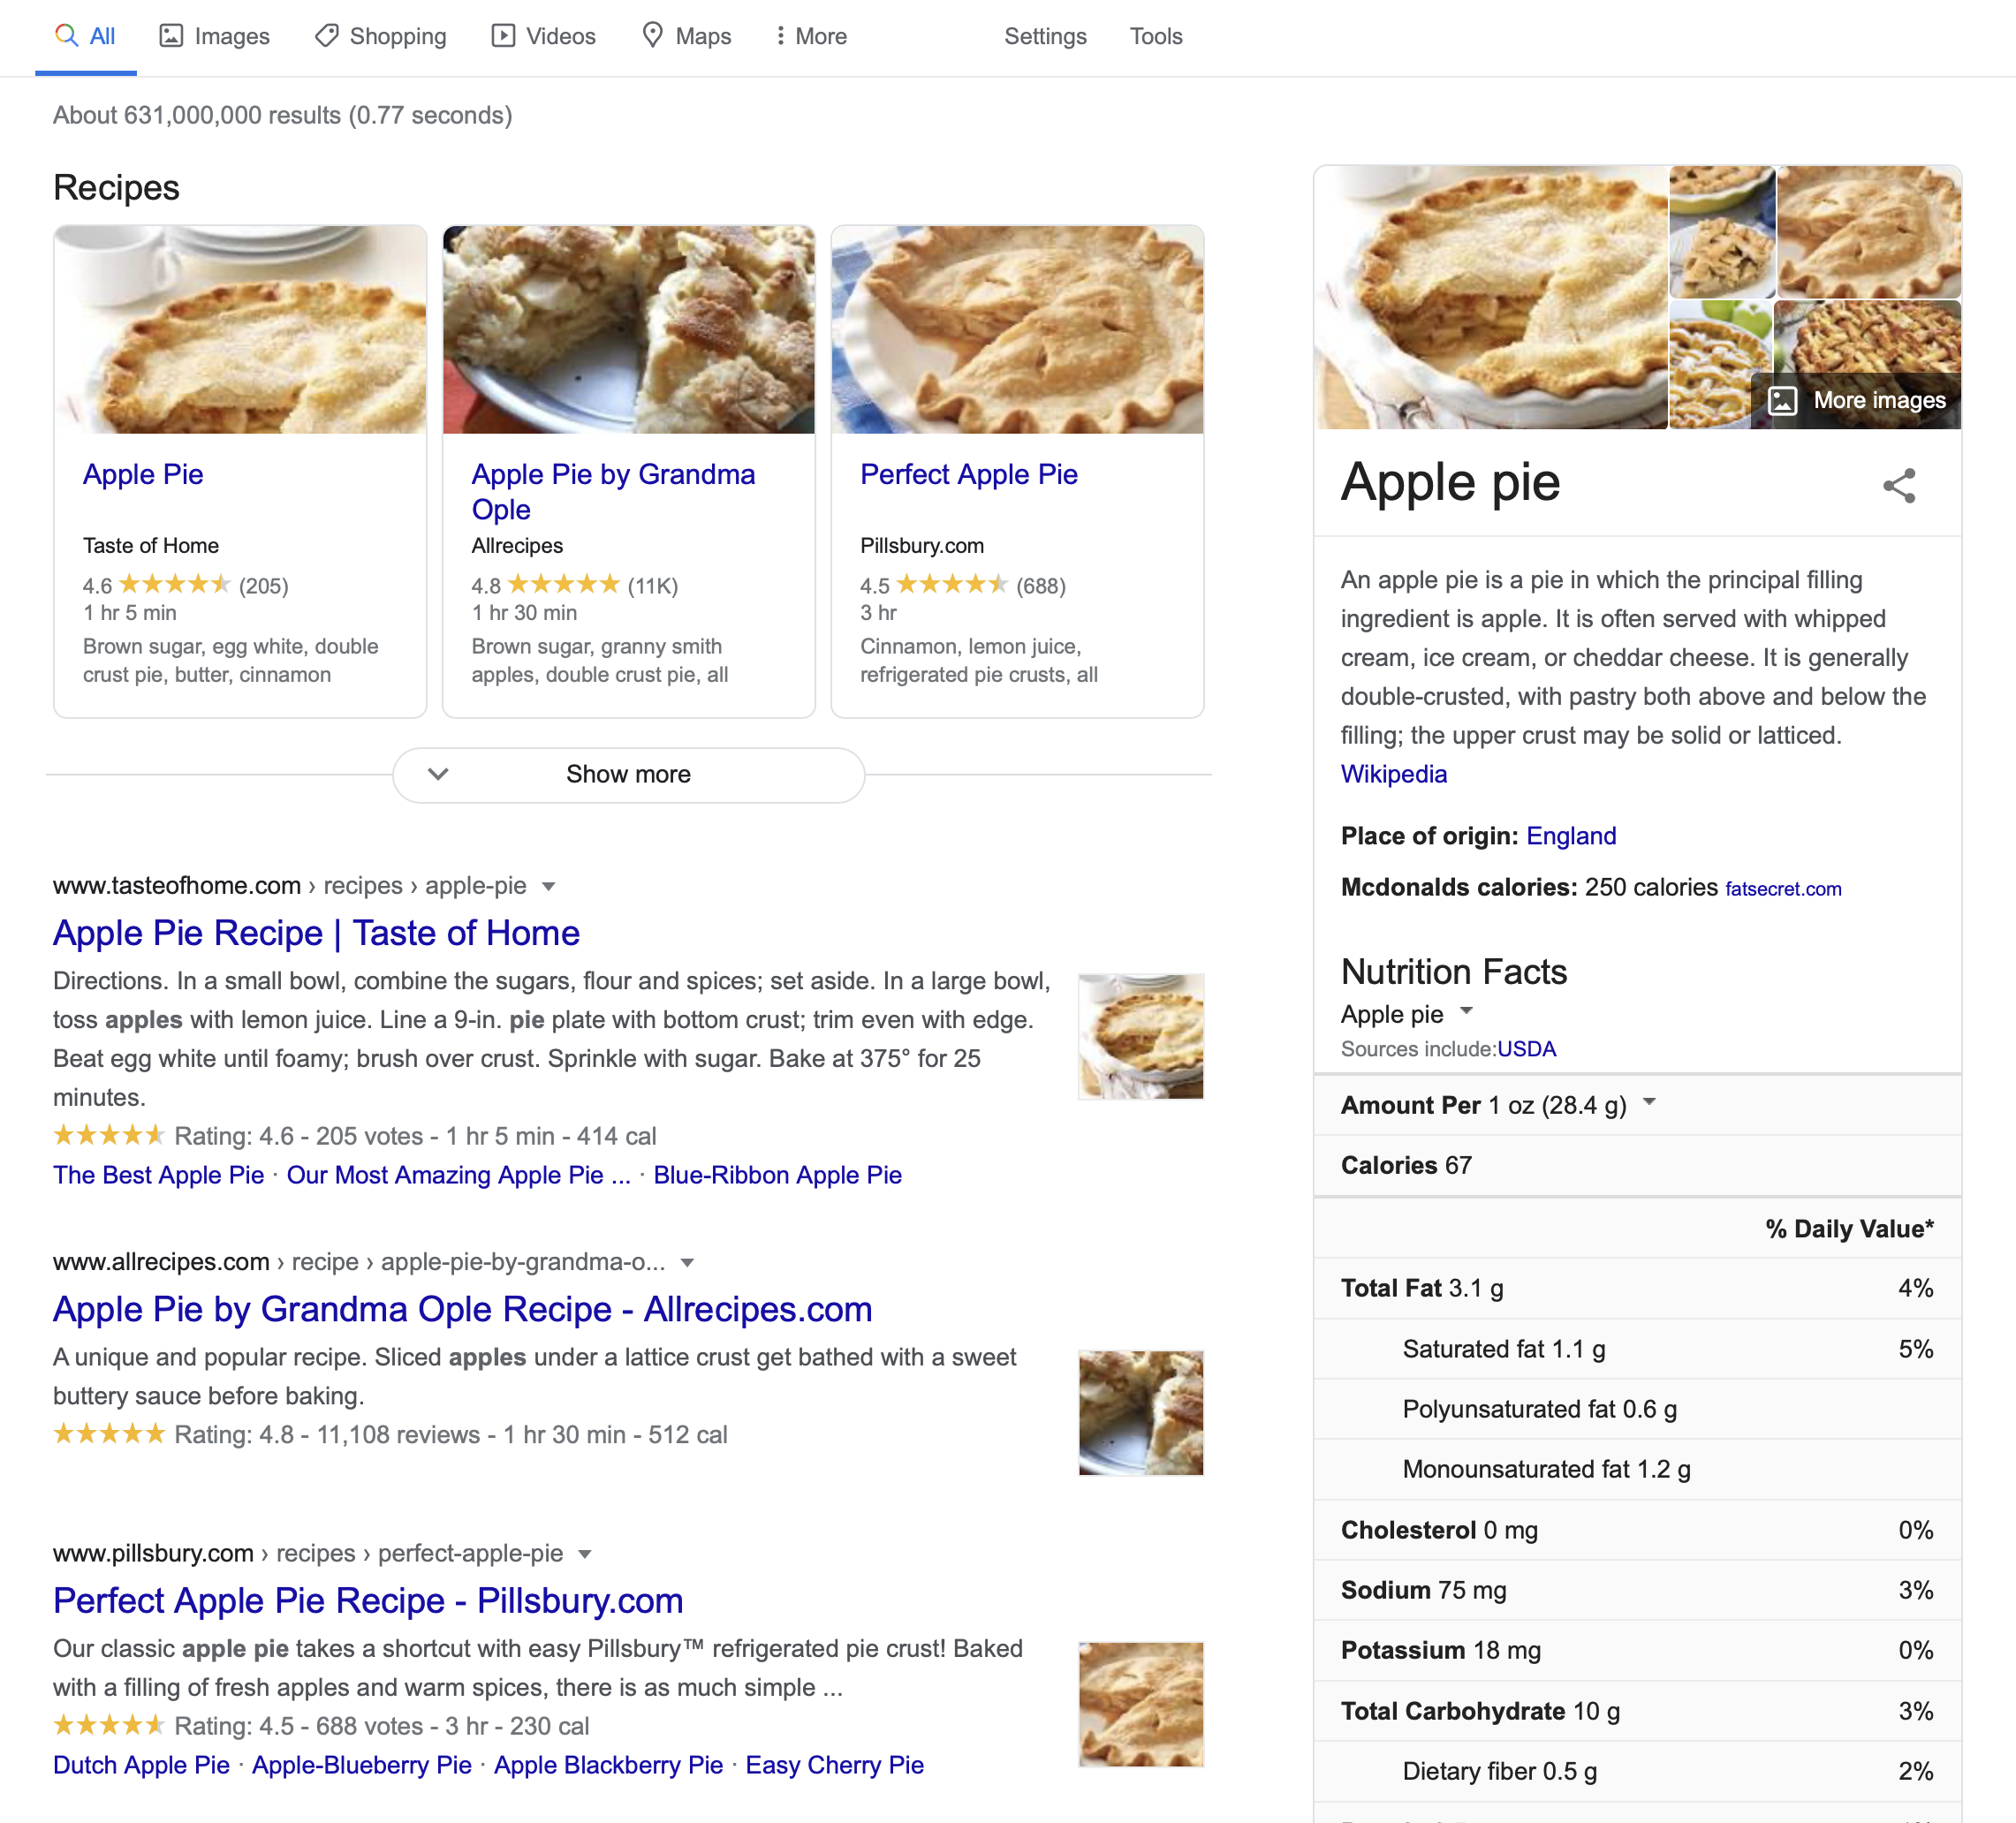 A screenshot of Google search results for apple pie, showing a list of results, and a Wikipedia summary in the margin, with nutrition facts.“